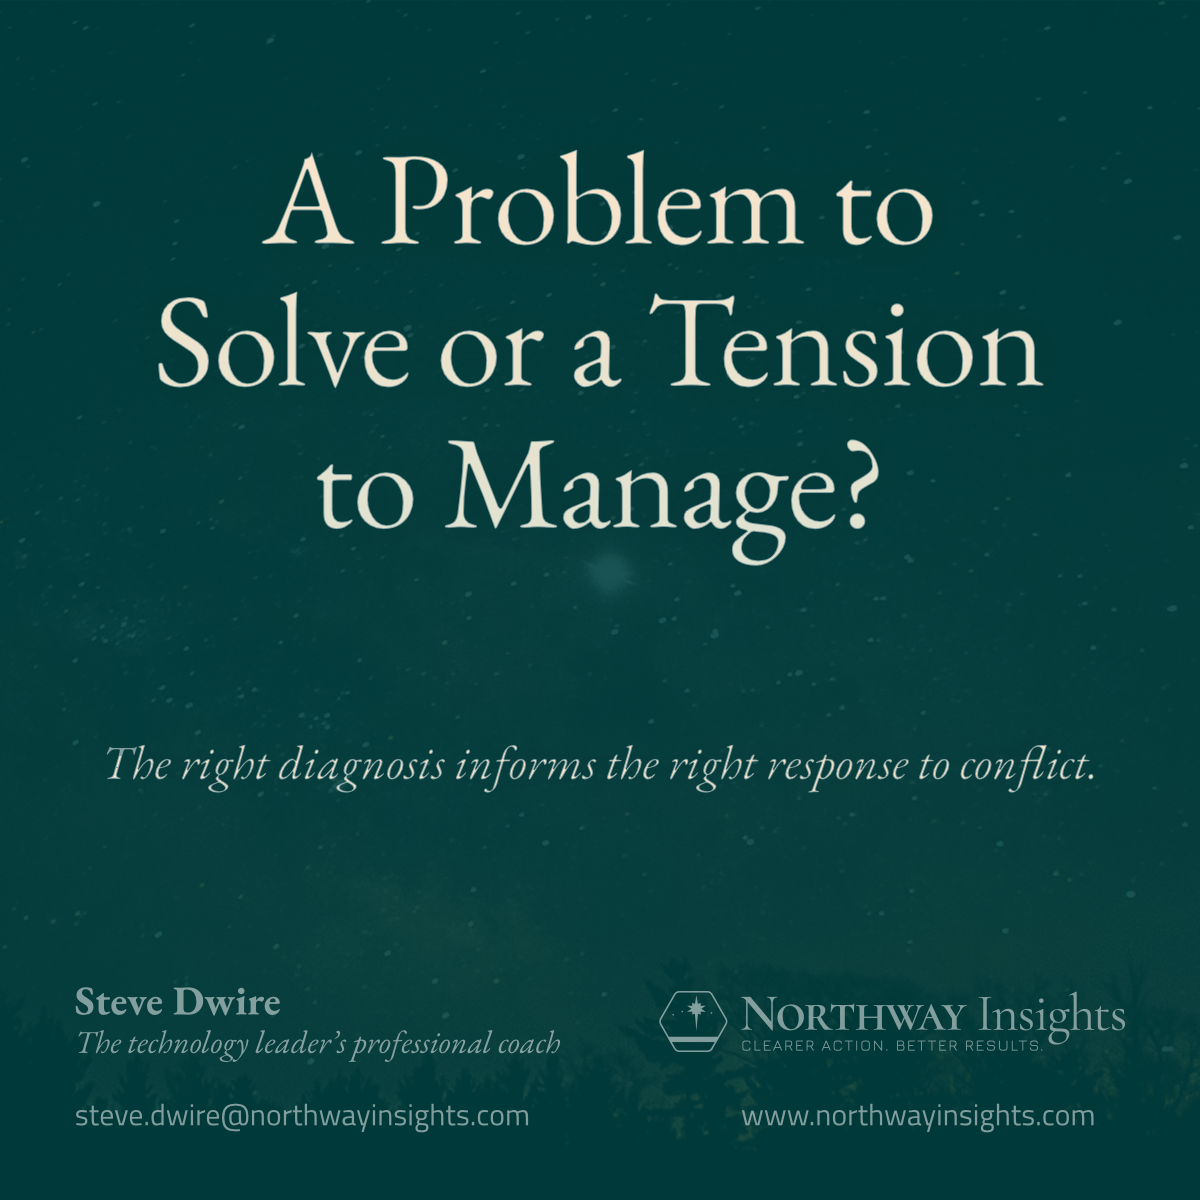 A Problem to Solve or a Tension to Manage?